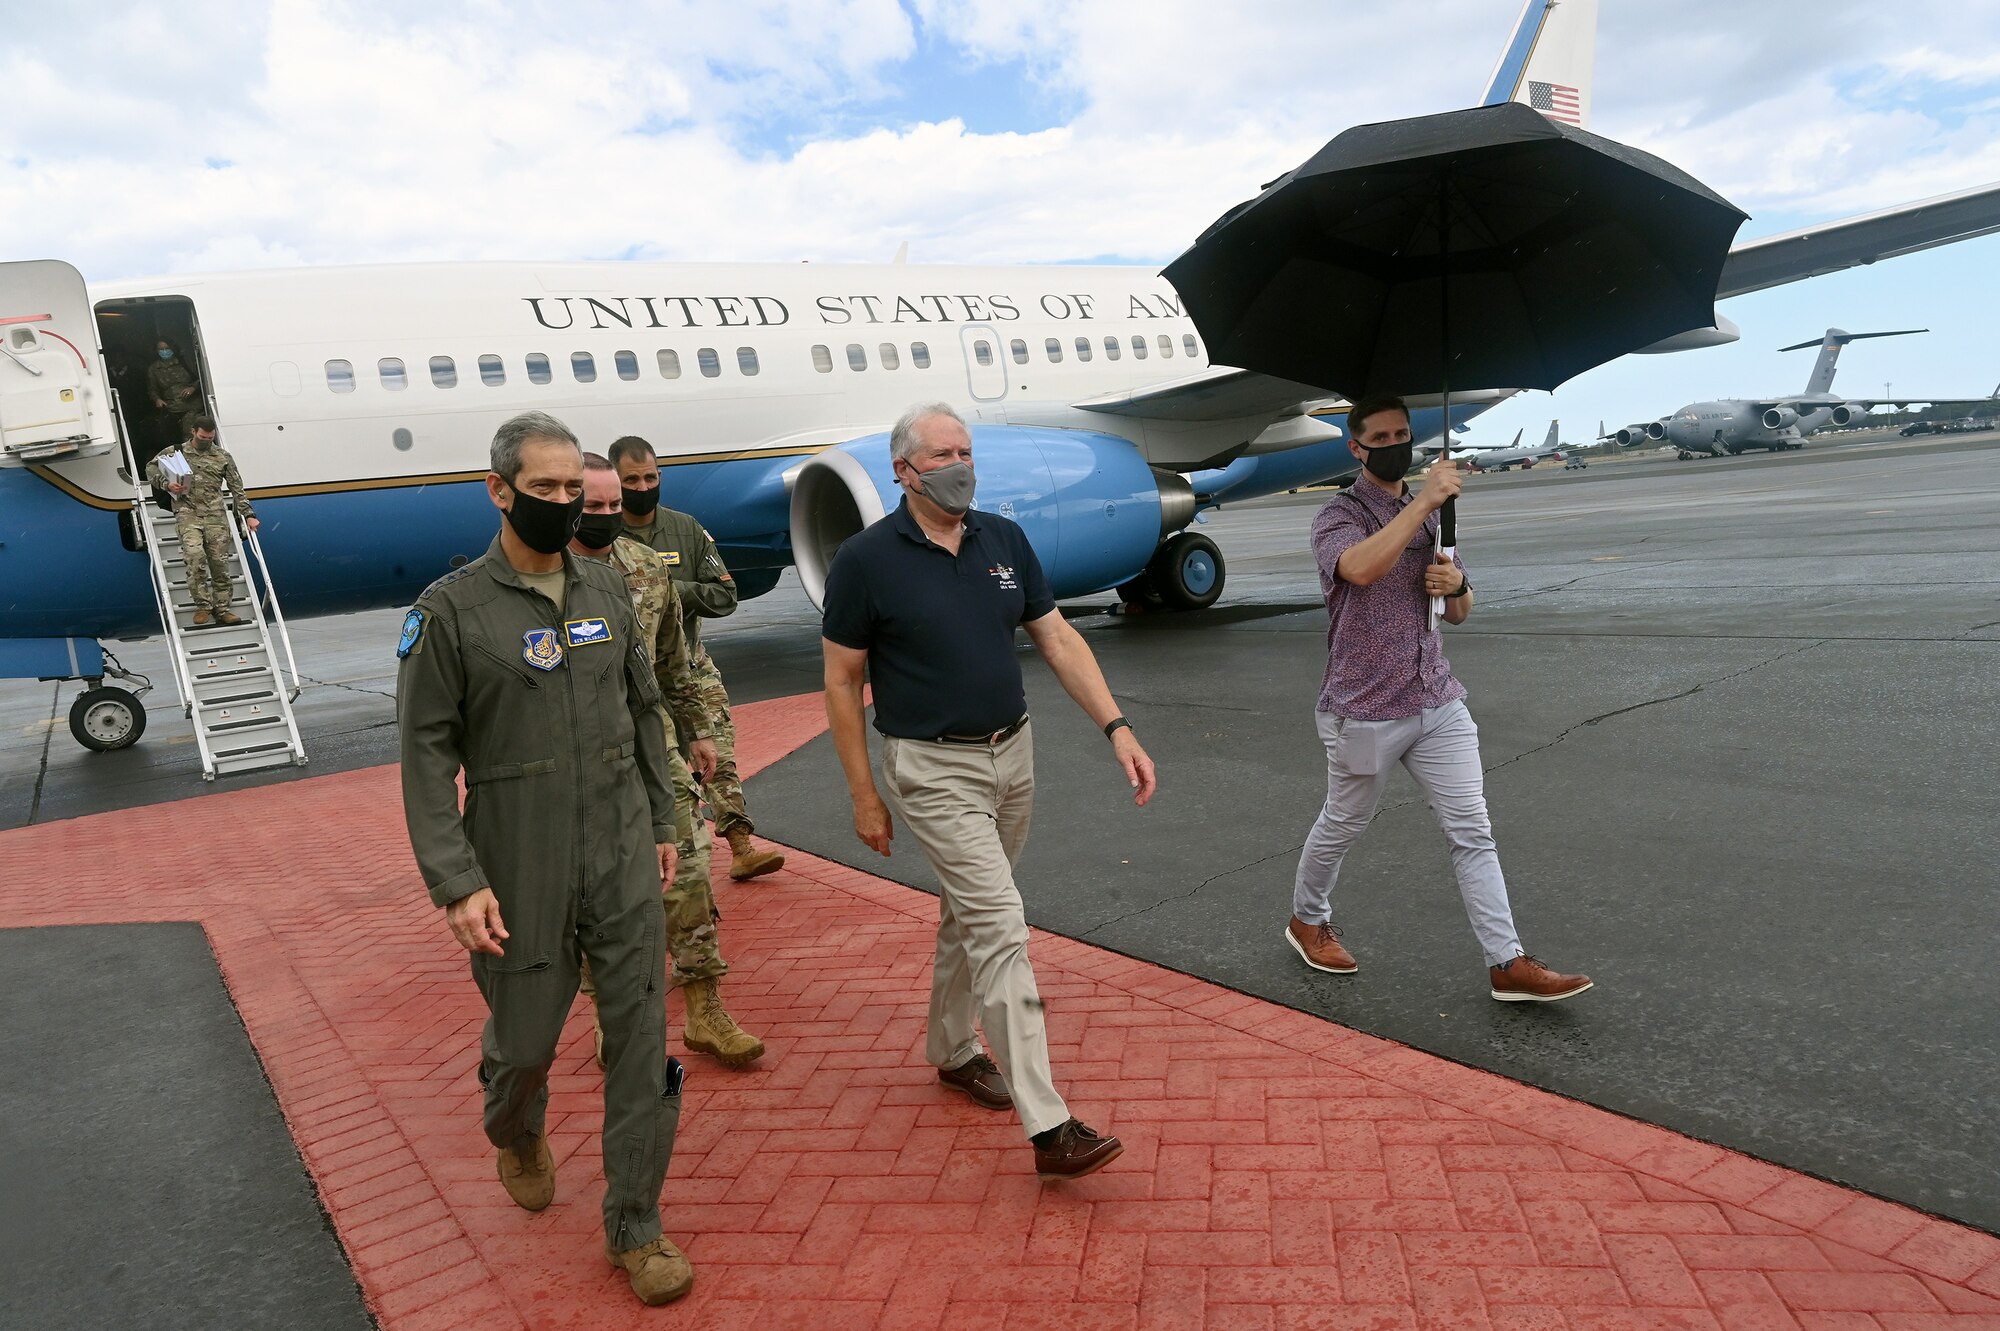 Secretary of the Air Force Frank Kendall walks with Gen. Ken Wilsbach, Pacific Air Forces commander after arriving at Joint Base Pearl Harbor-Hickam, Hawaii, Aug. 16, 2021. During the visit, Kendall emphasized the importance of diversity and inclusion, innovation, Airmen readiness, and embracing U.S. relationships with allies and partners to ensure a free and open Indo-Pacific region. (U.S. Air Force photo by Wayne Clark)